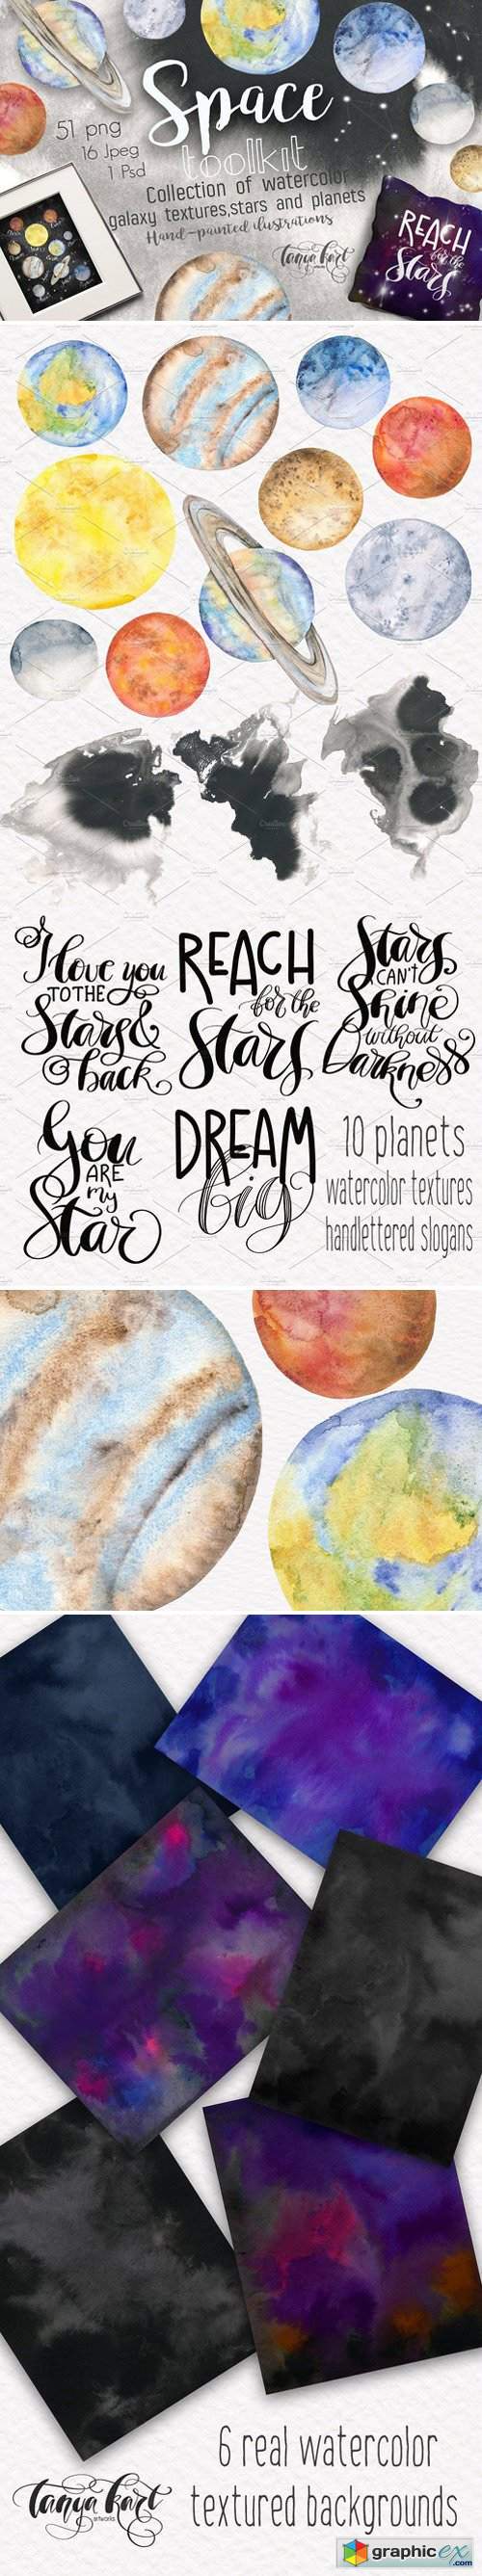 Space Toolkit Watercolor Planets